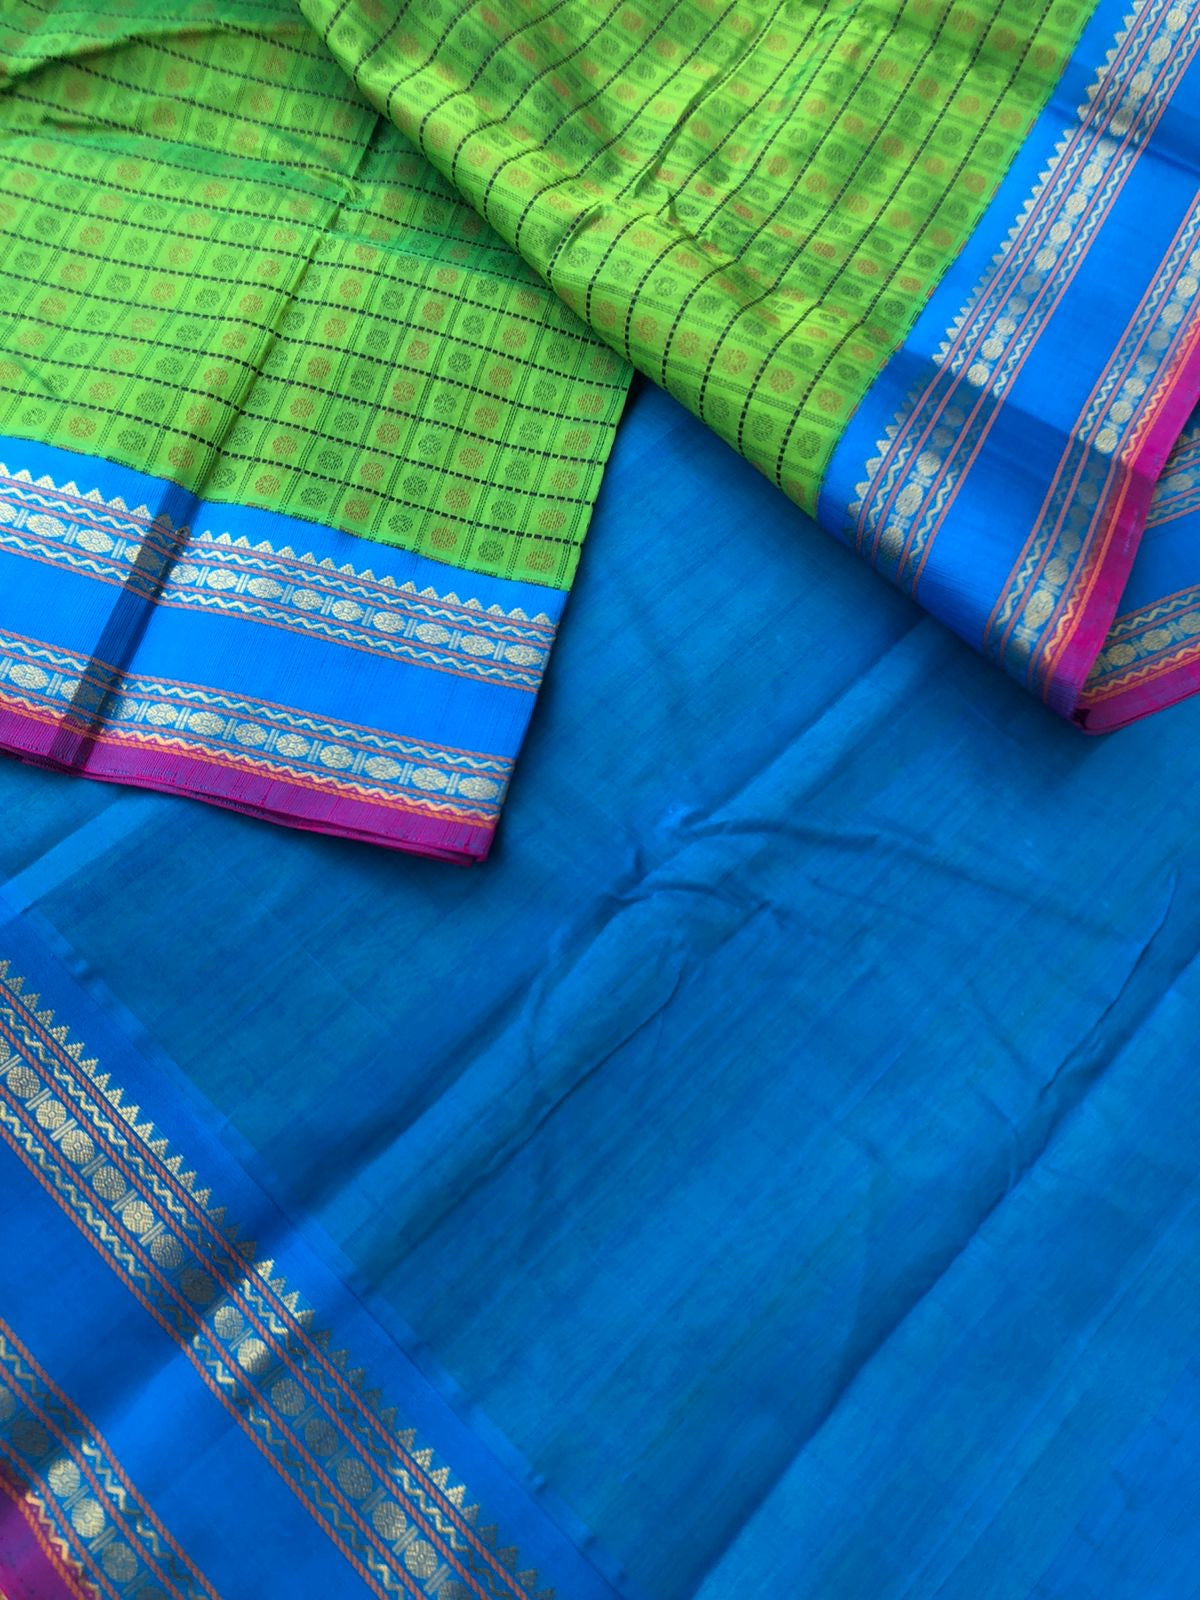 Divyam - Korvai Silk Cotton with Pure Silk Woven Borders - apple green and blue intricate 1000 buttas